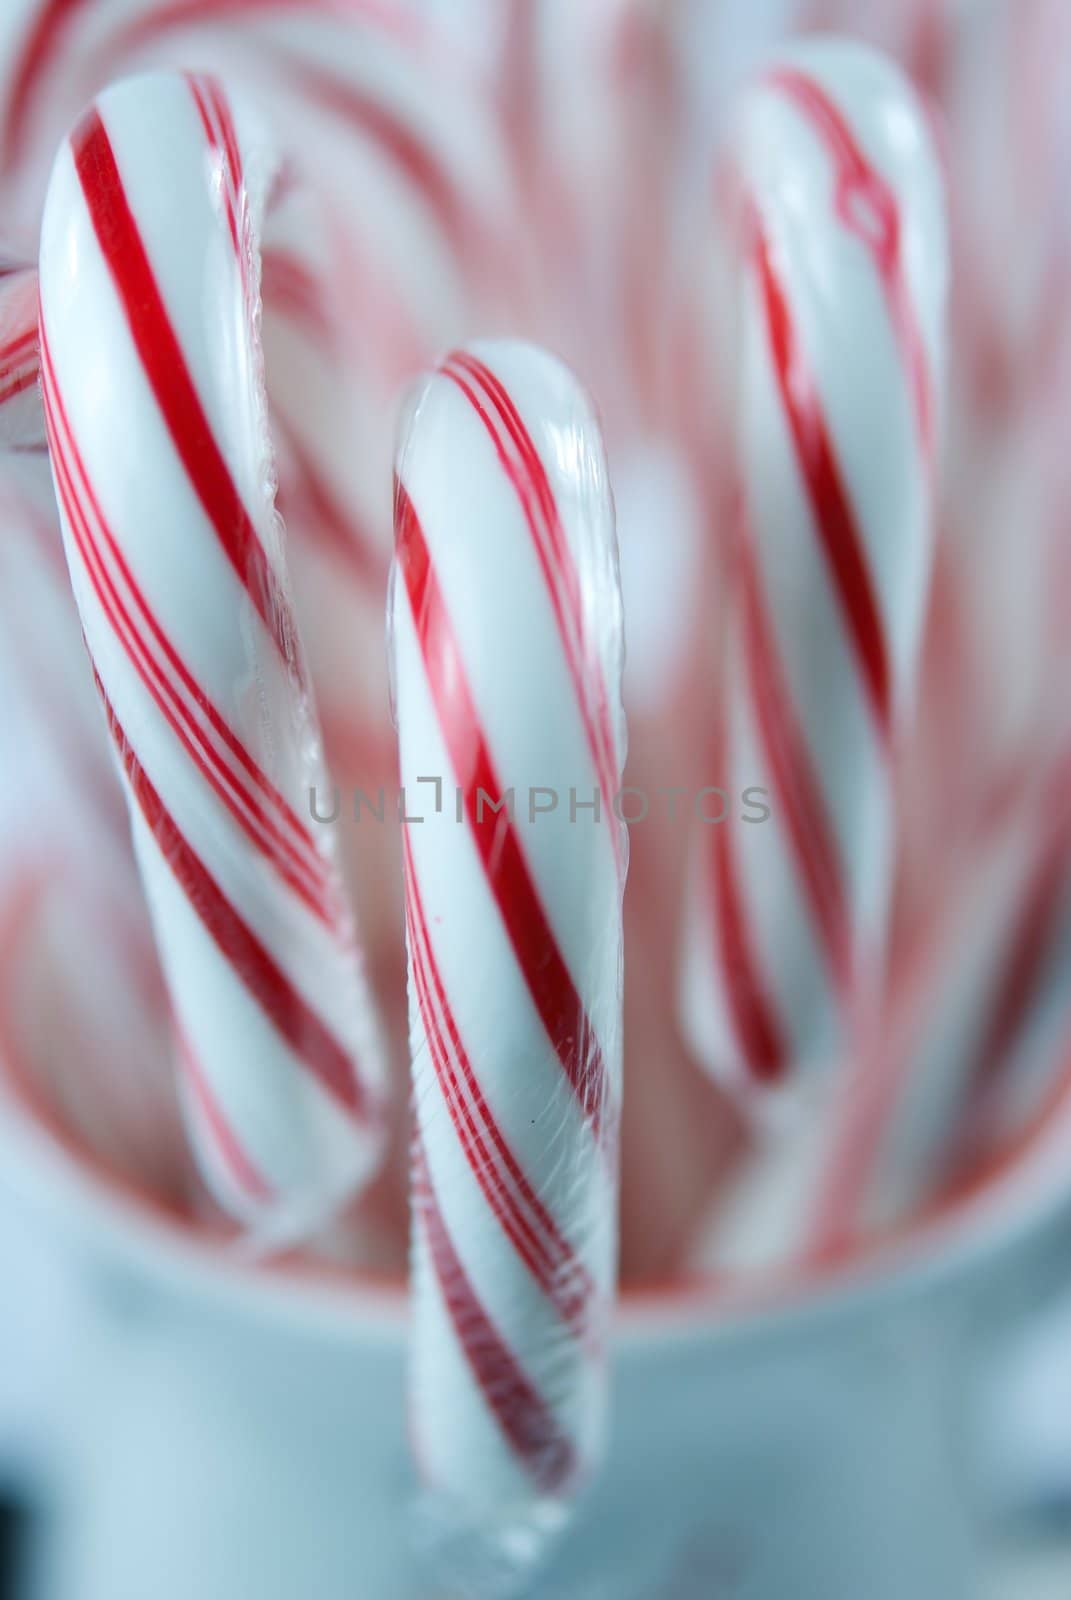 Three Candy Canes in Mug by pixelsnap